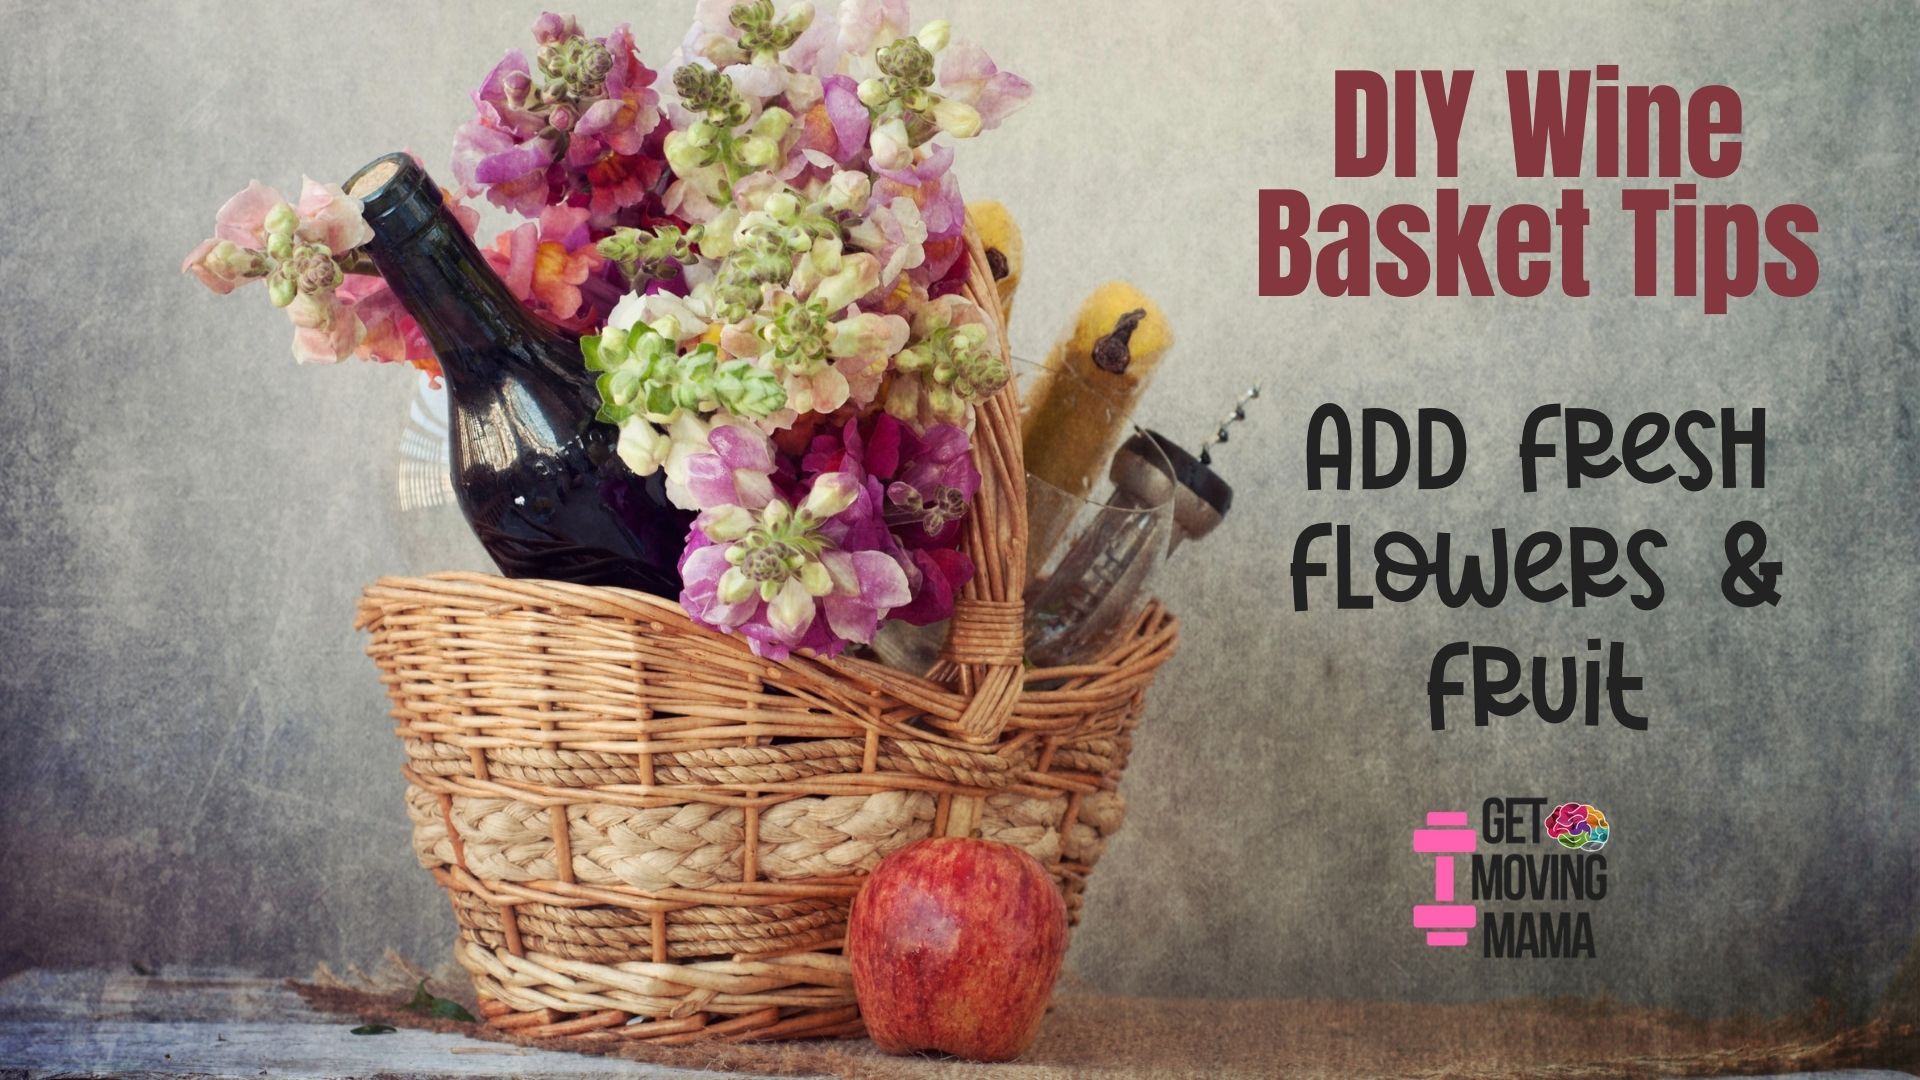 A picture of a wine basket with fresh flowers and fruit.